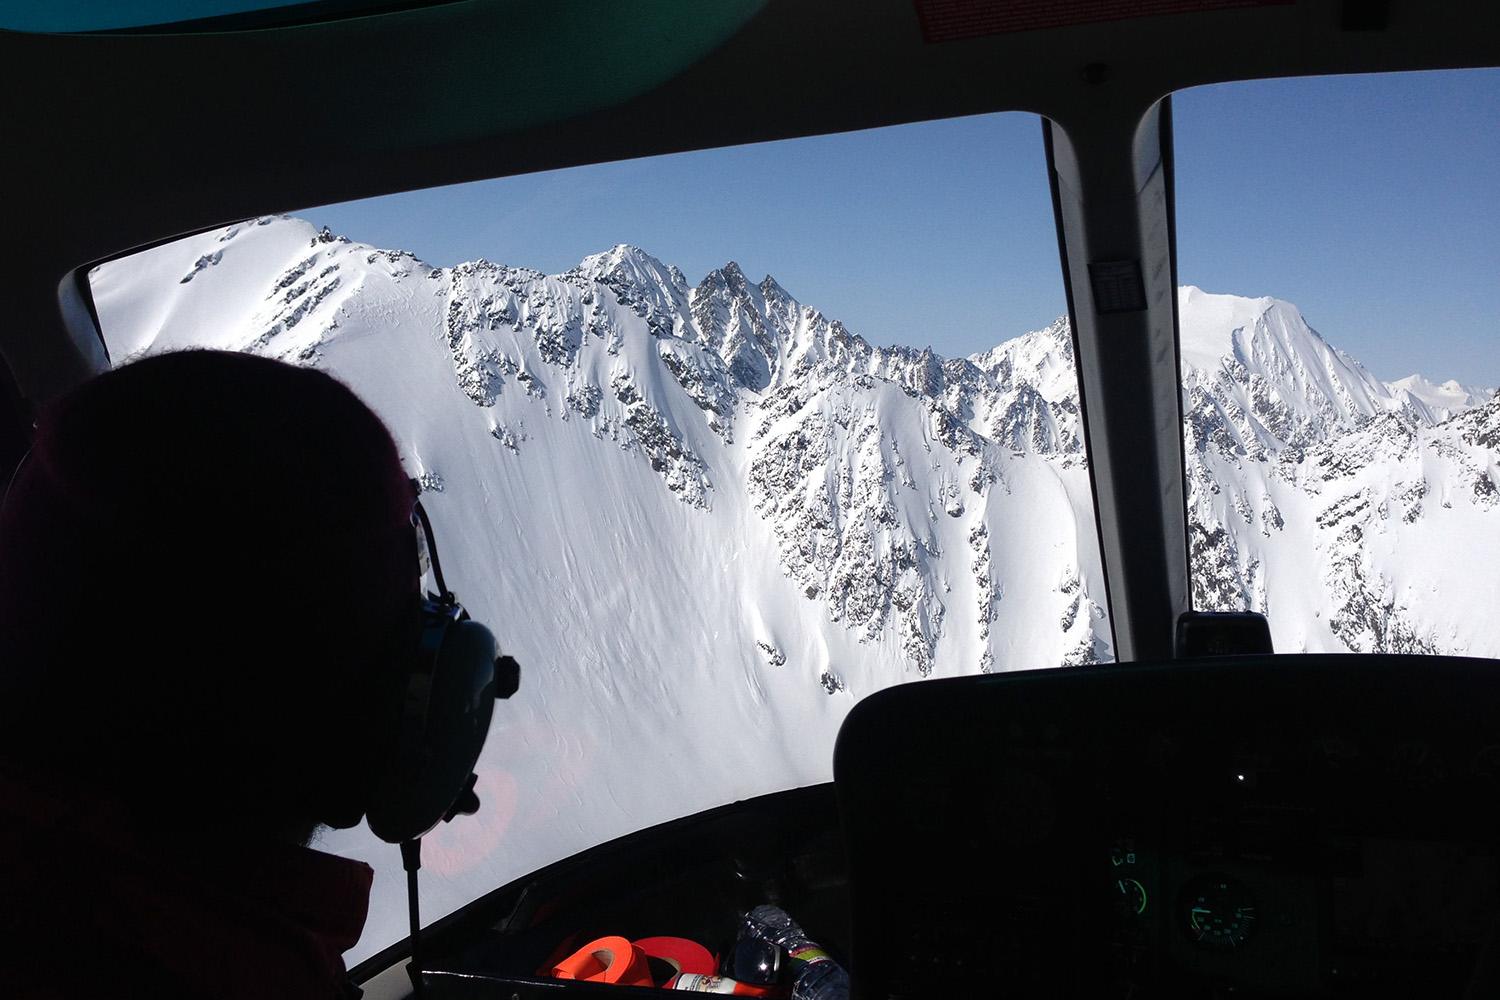 Heli Skiing Information (Choppers)